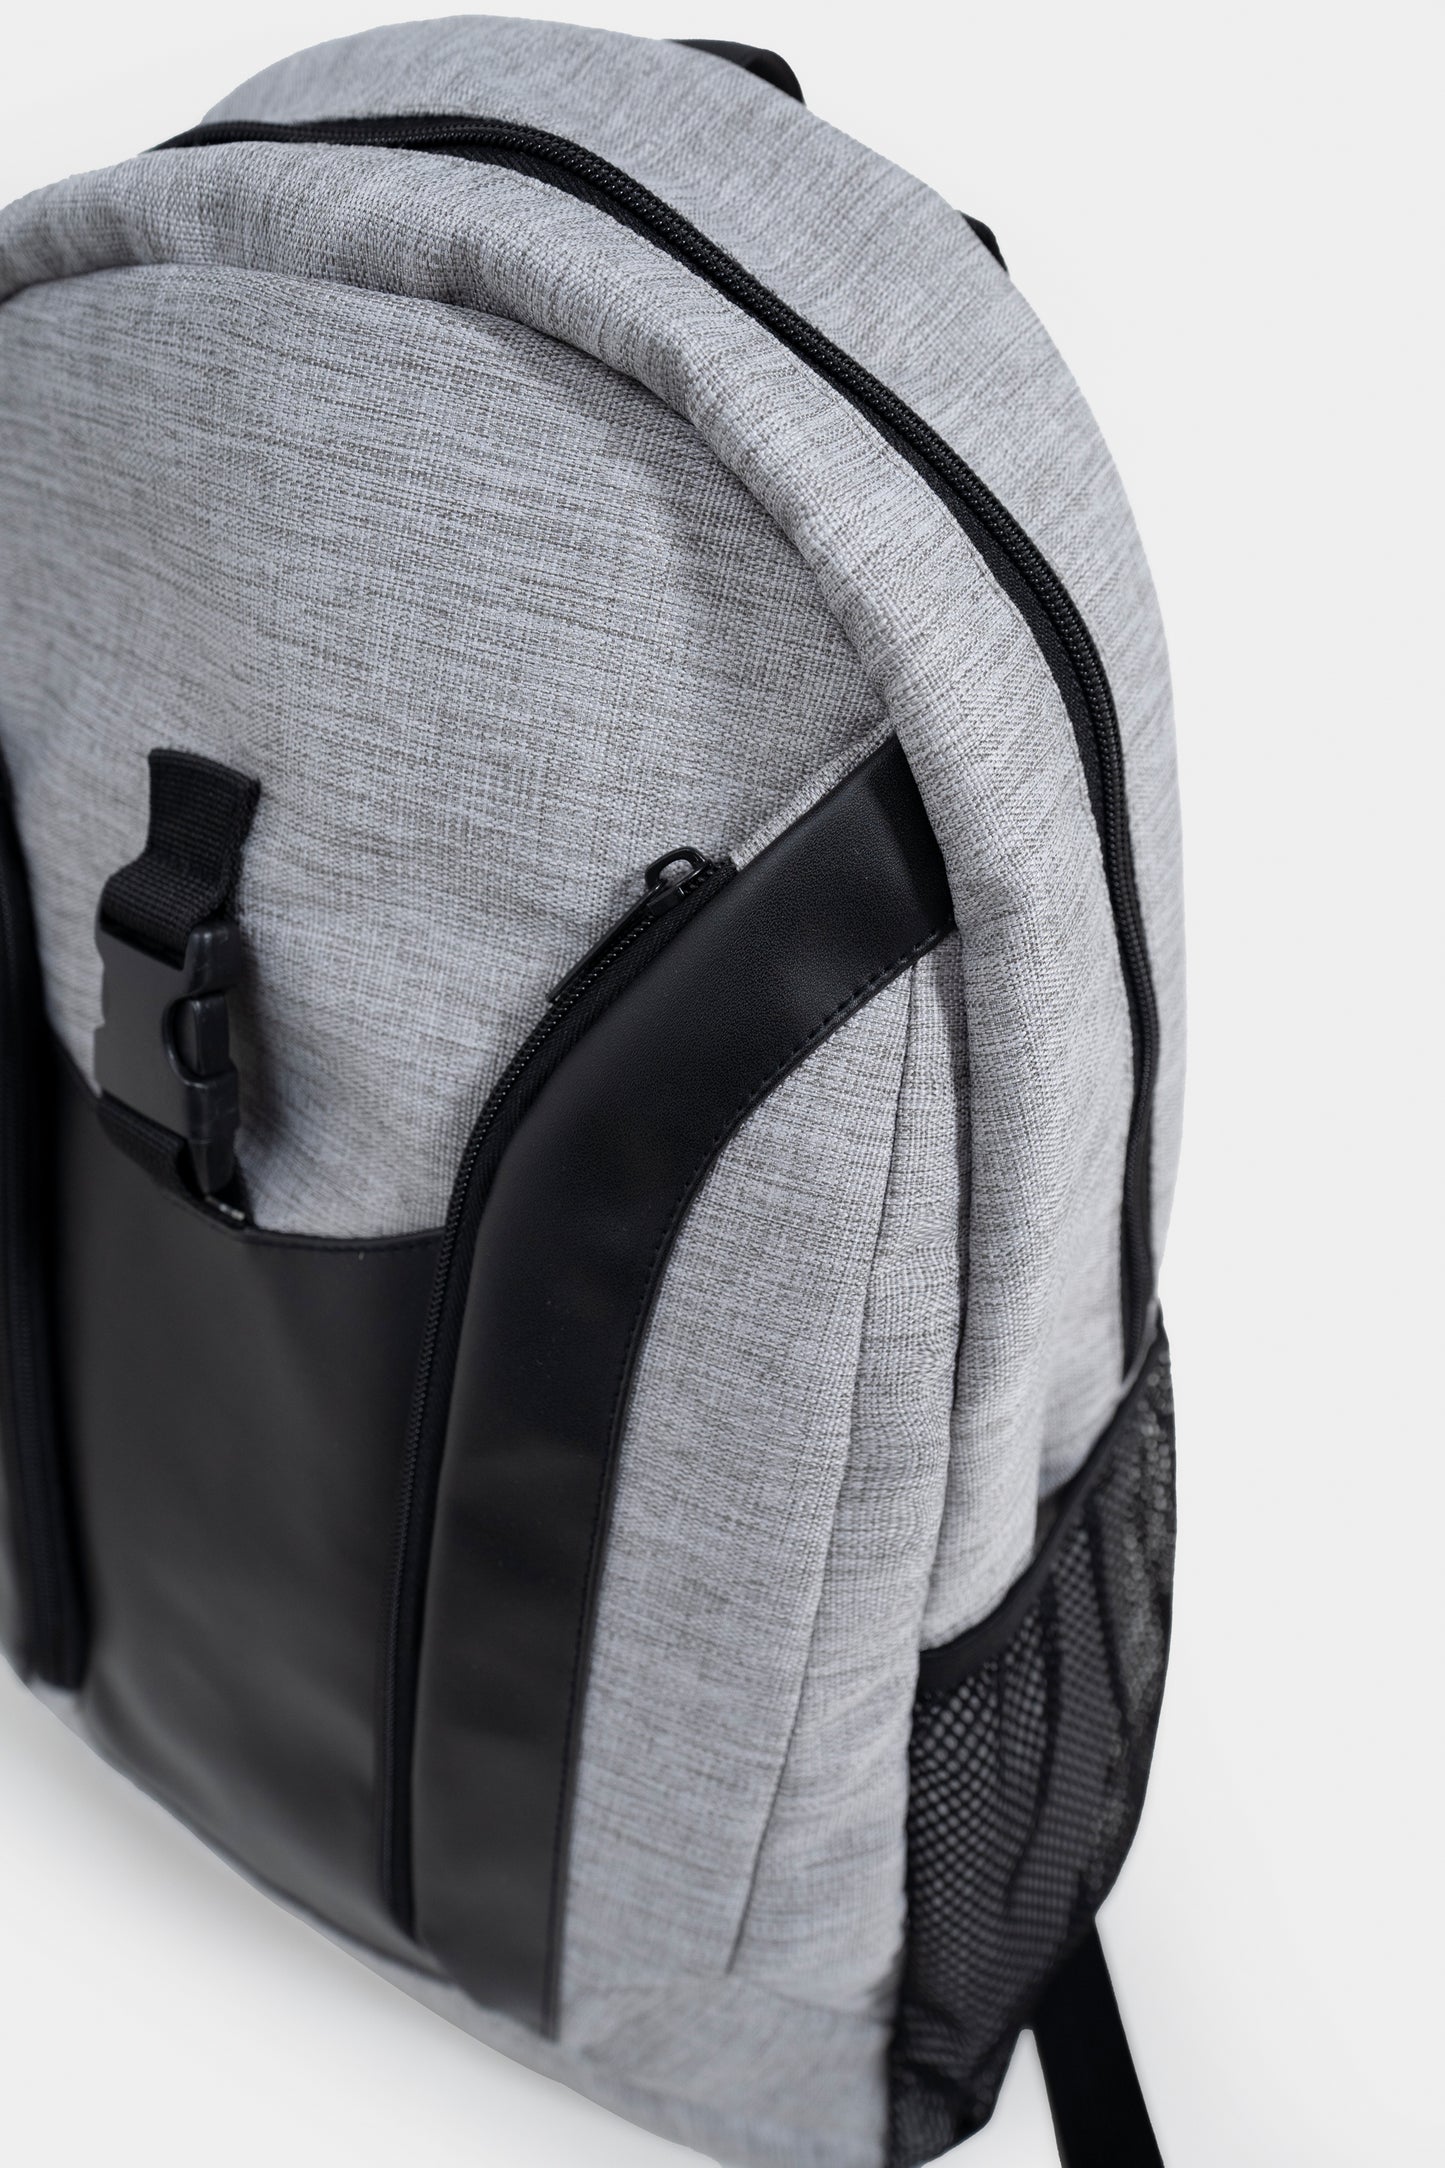 Two-Toned Backpack